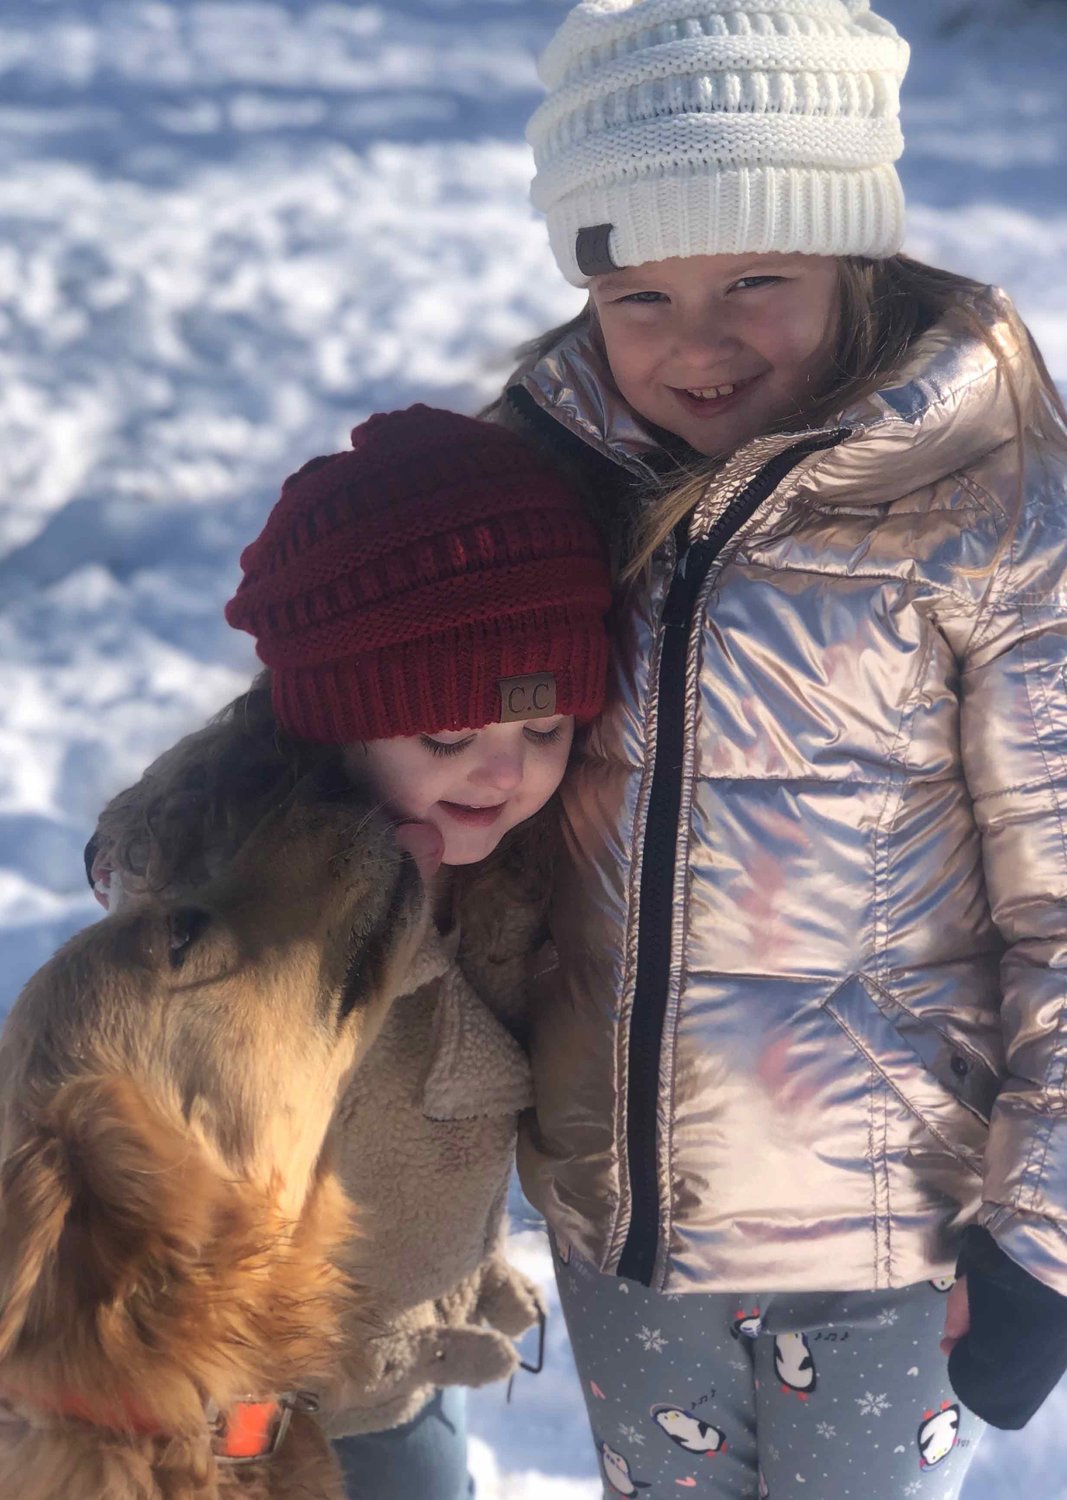 Sisters Gracie and Brinkley Sparks spent the day playing outside with their dog Oliver.